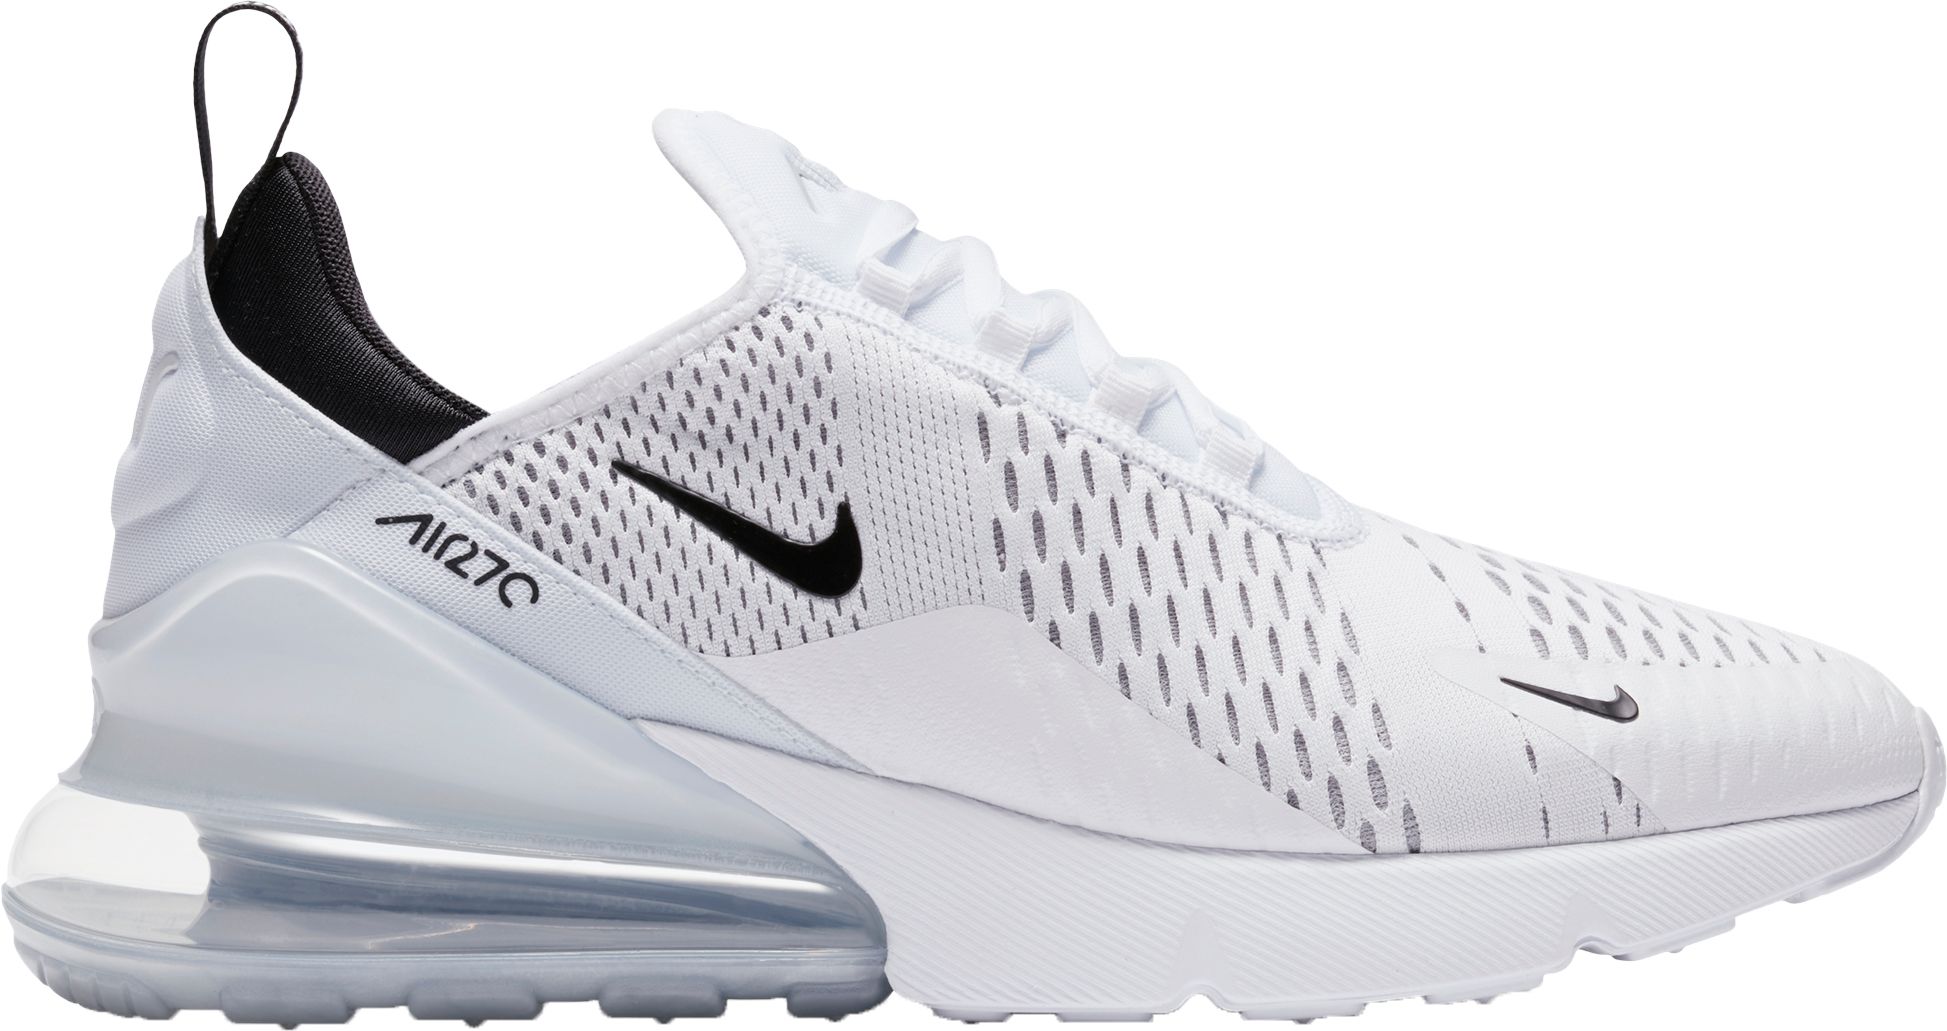 nike white and black air max 270 sneakers